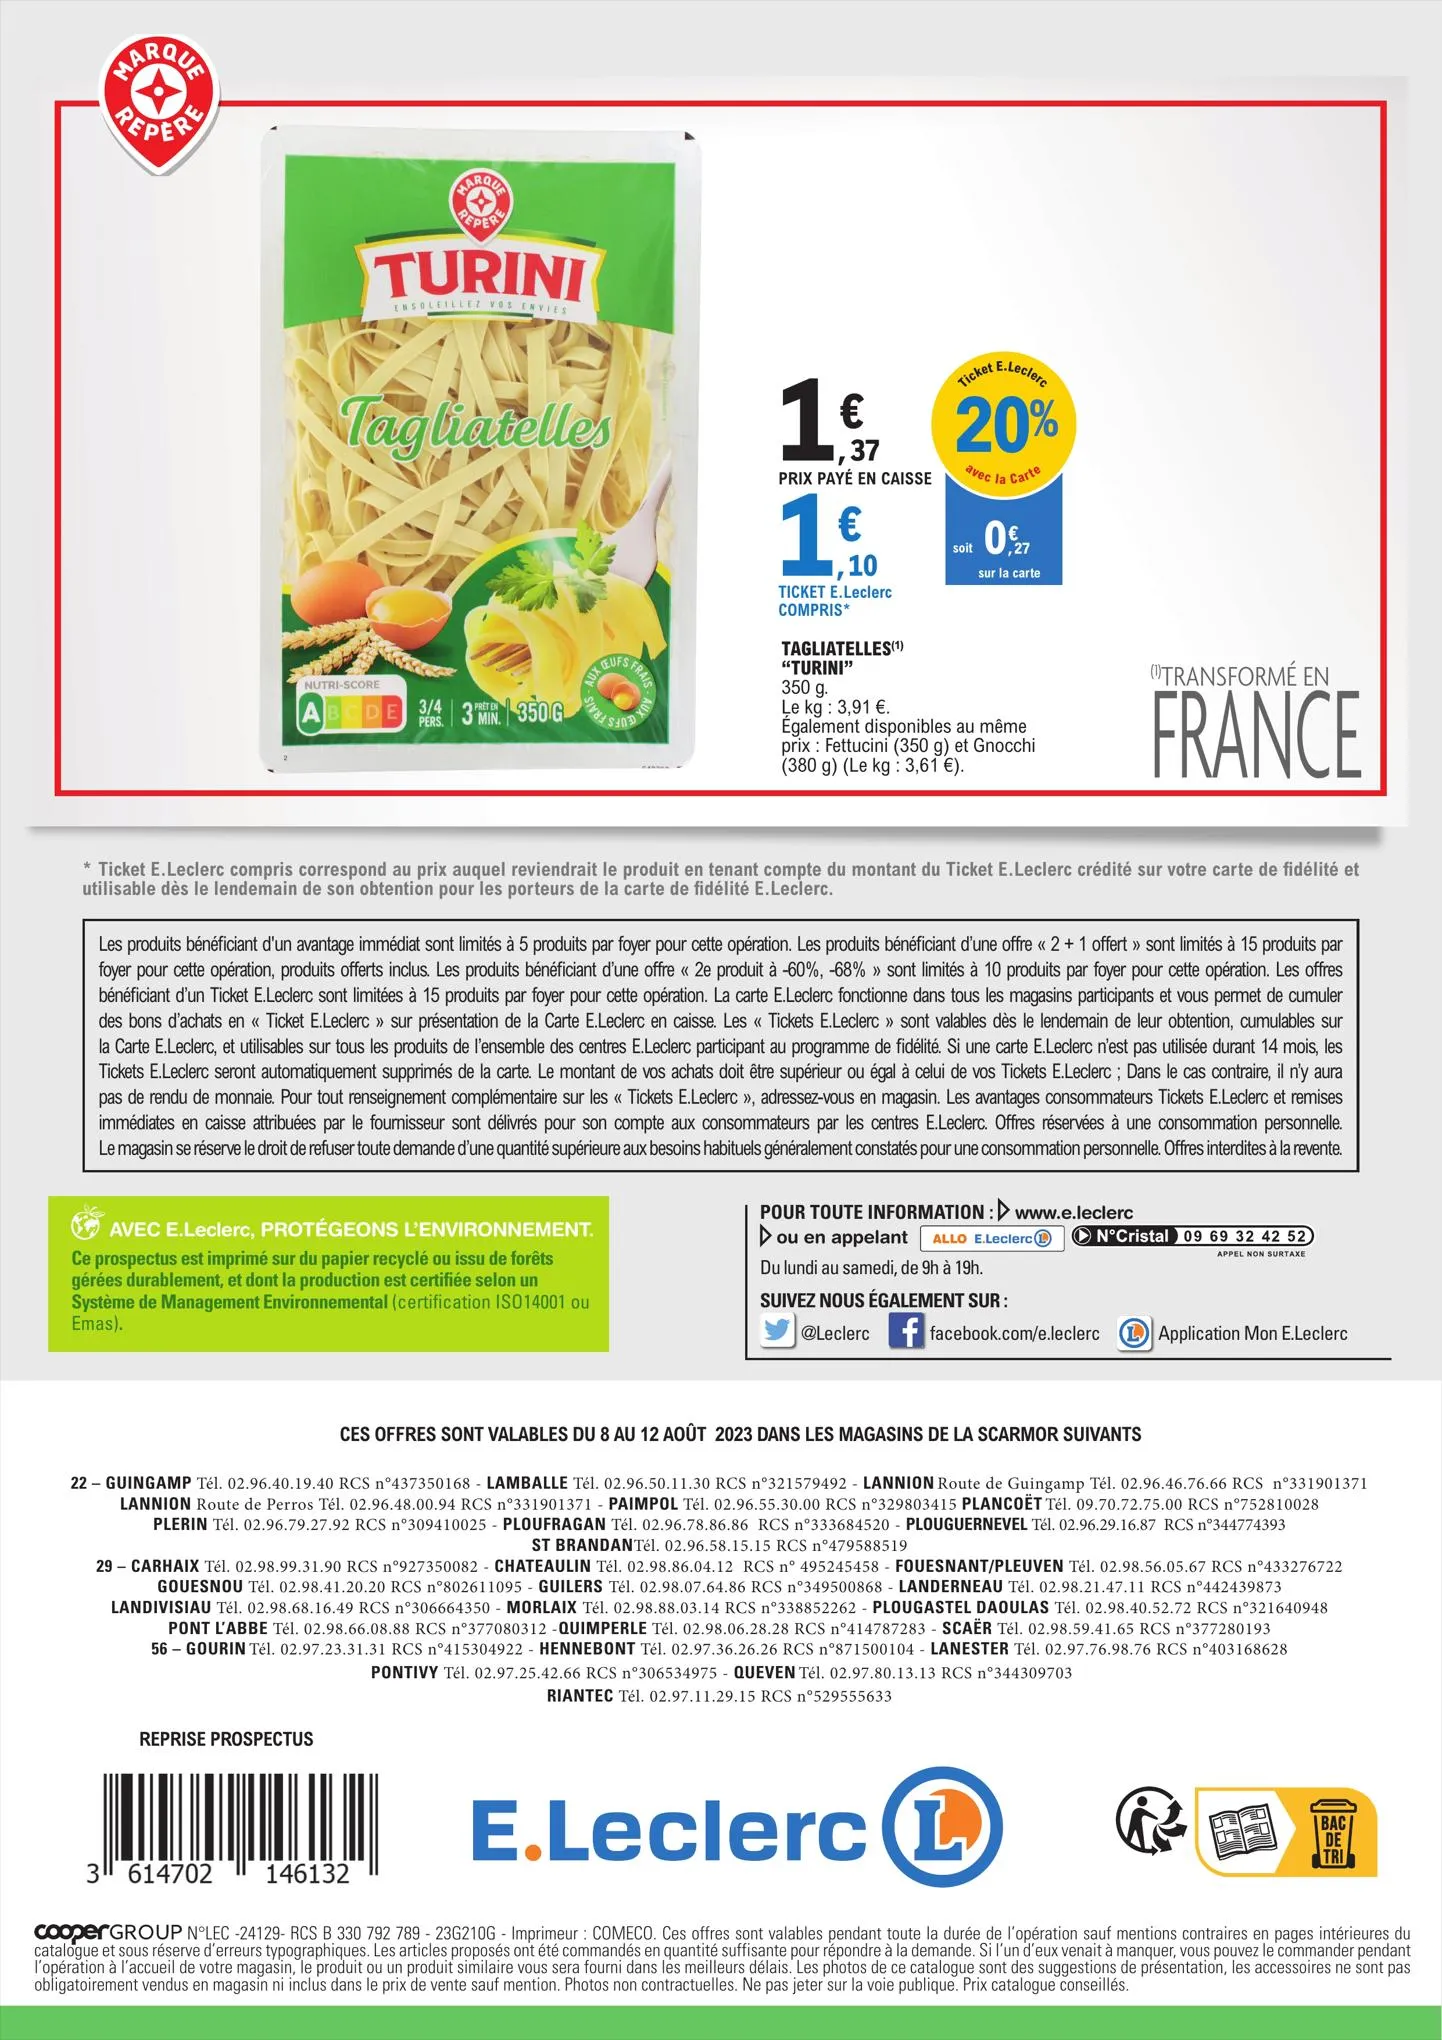 Catalogue Relance Alimentaire 10 - Mixte, page 00024